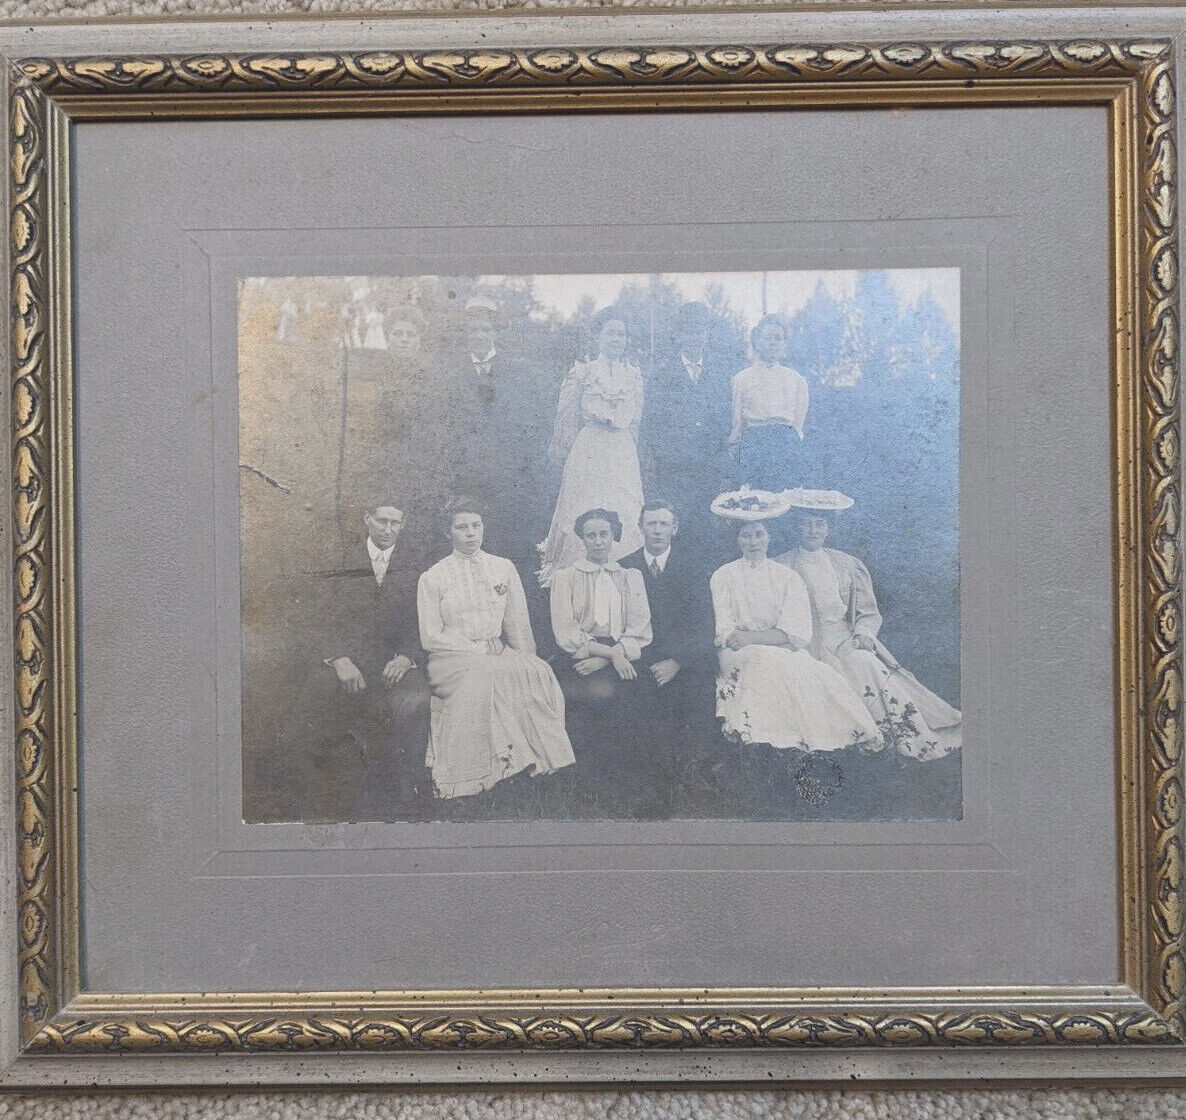 Antique Photograph Edwardian Family Outdoors w/ Frame